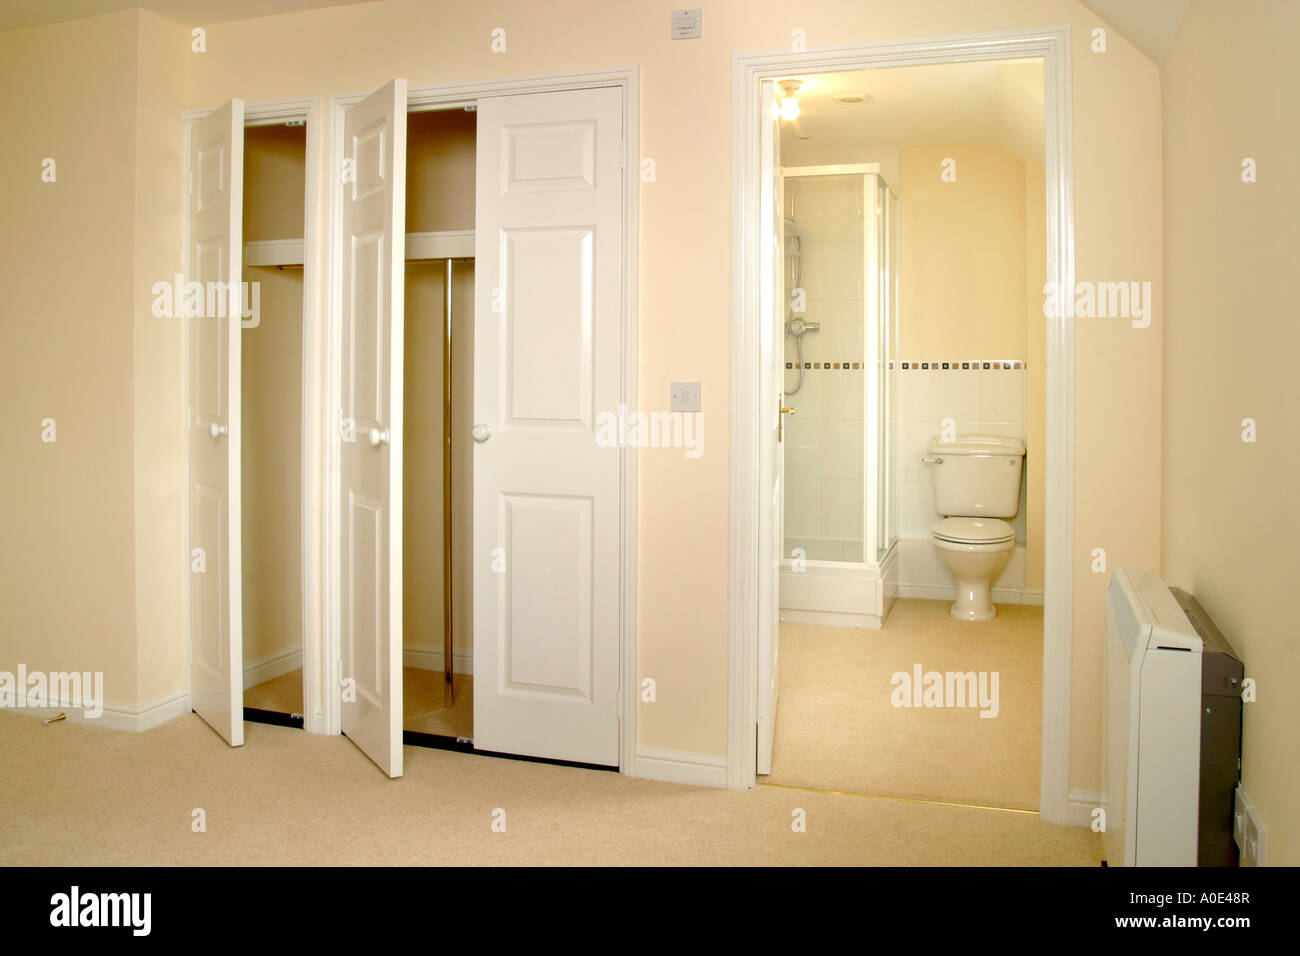 UK showhome interior, unfurnished bedroom and ensuite bathroom. Stock Photo